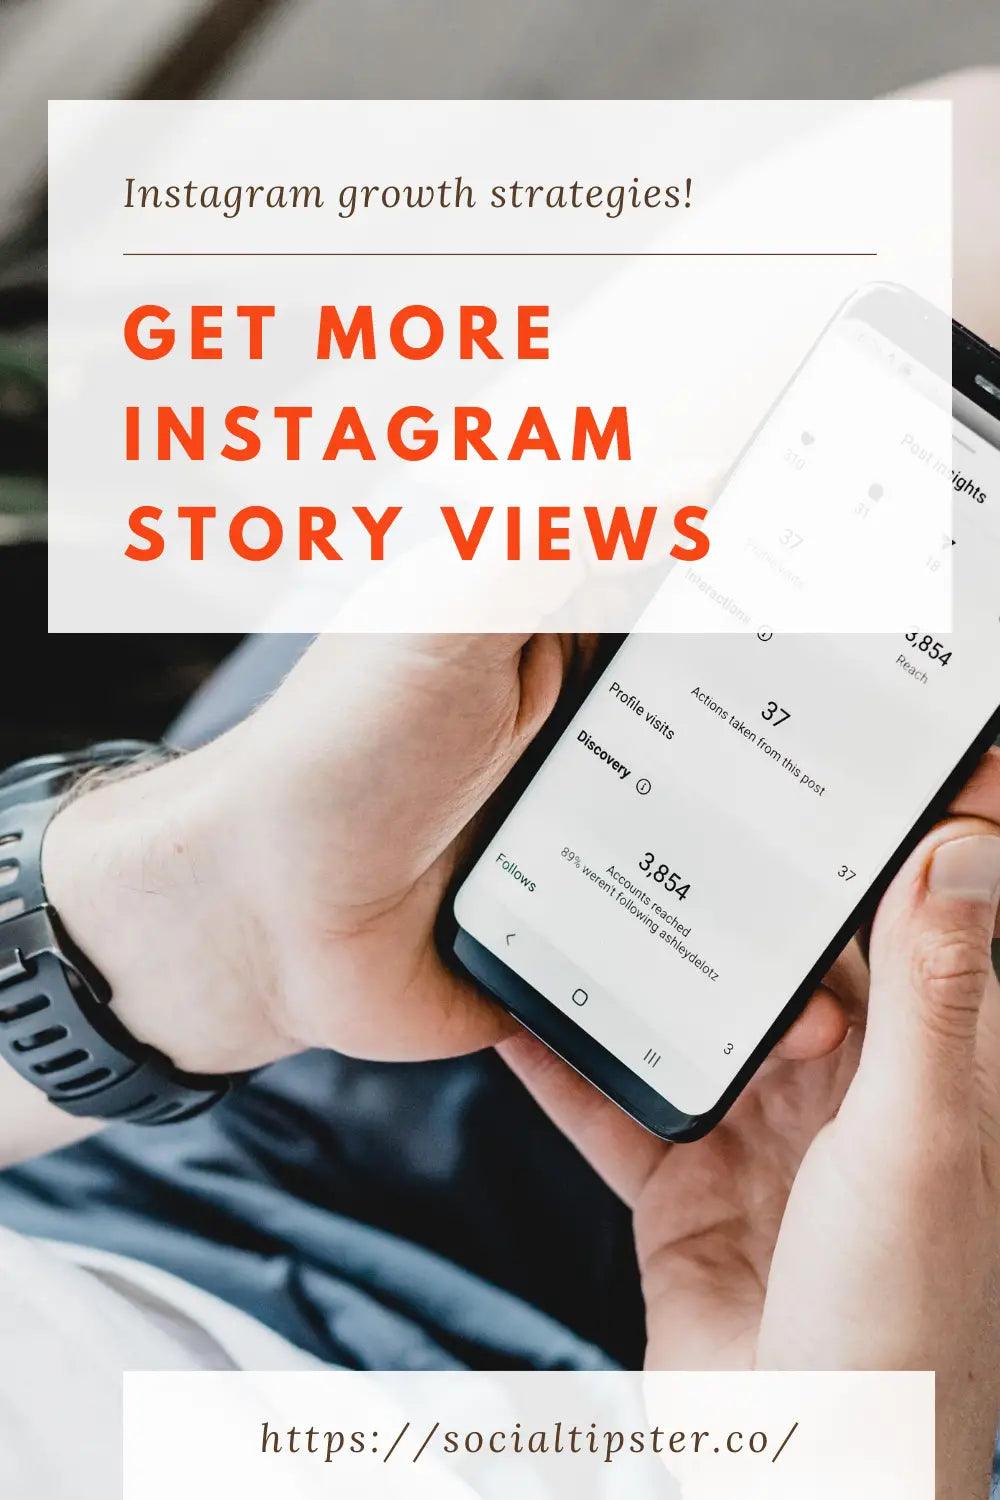 Get More Instagram Story Views;more story views;more story views;Get More Instagram Story Views in 2020;Get More Instagram Story Views in 2020